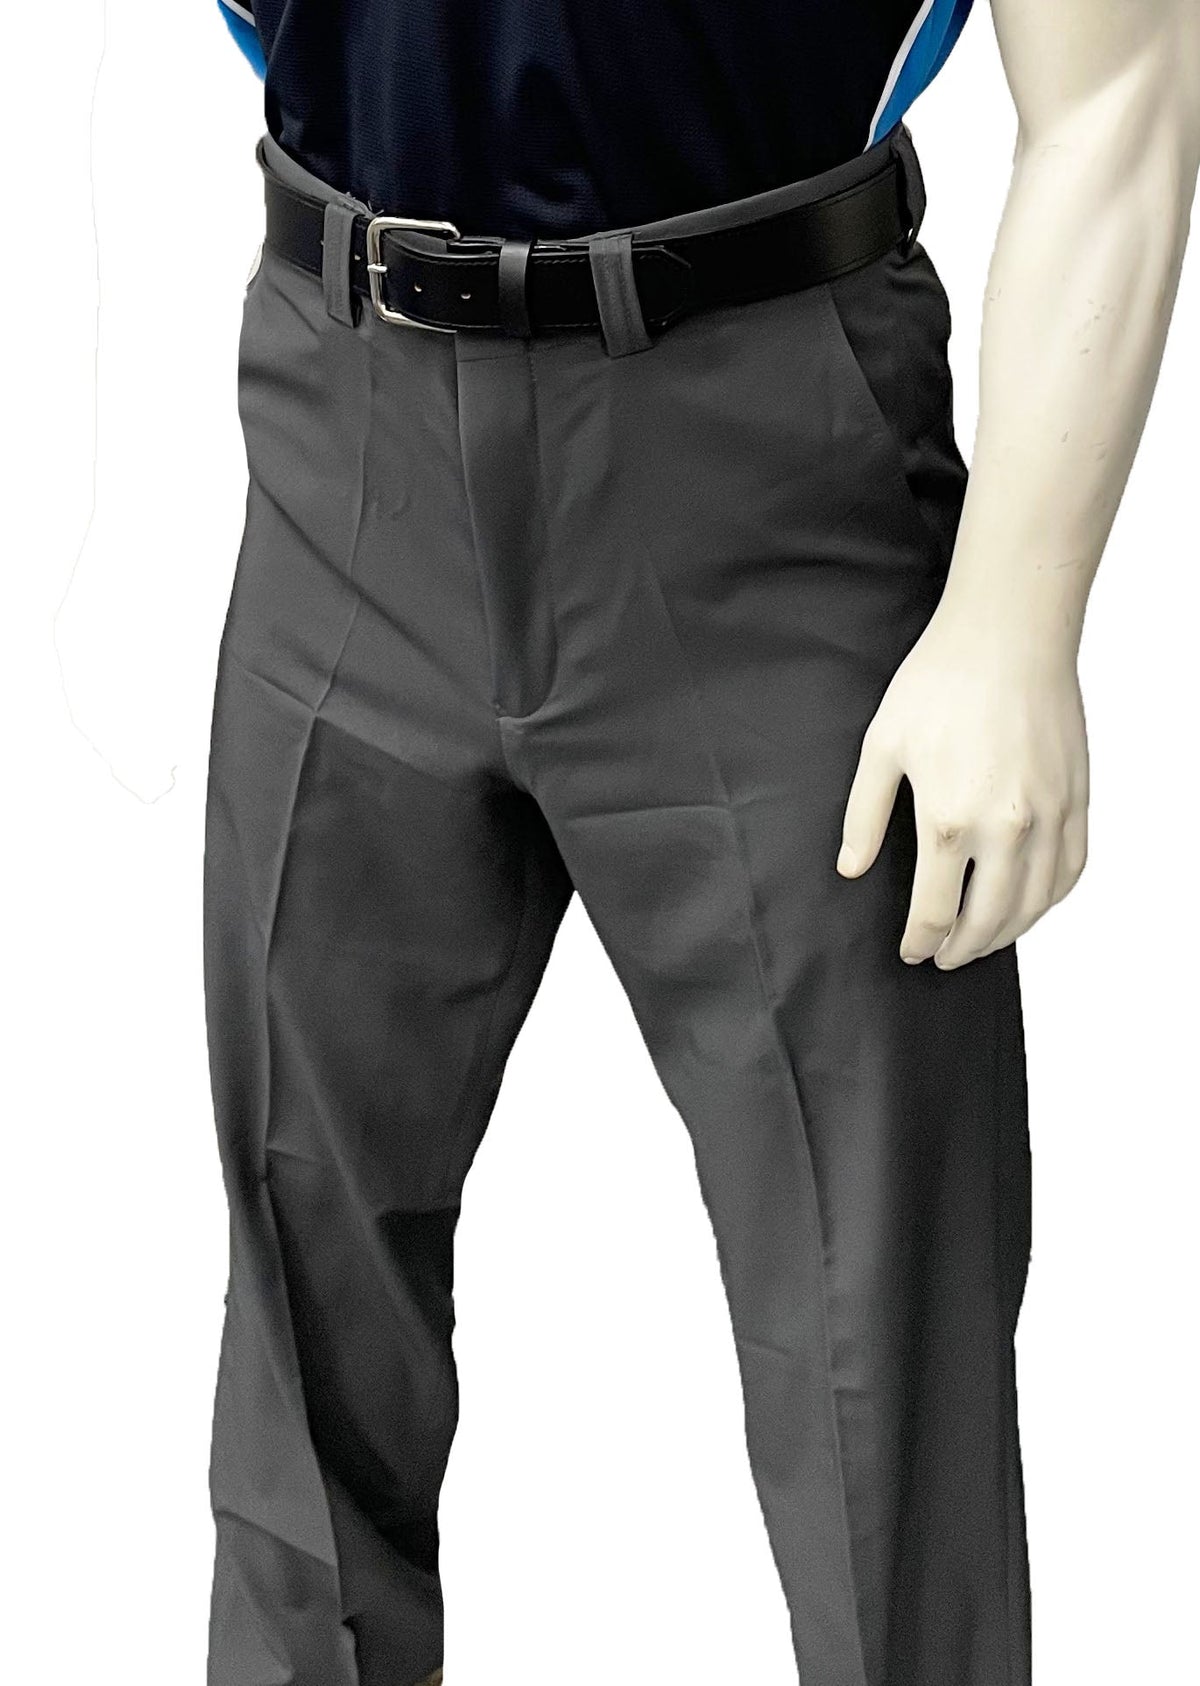 Smitty | BBS-358 | 4-Way Stretch Flat Front Plate Umpire Pants w Expander Waistband | Charcoal Grey